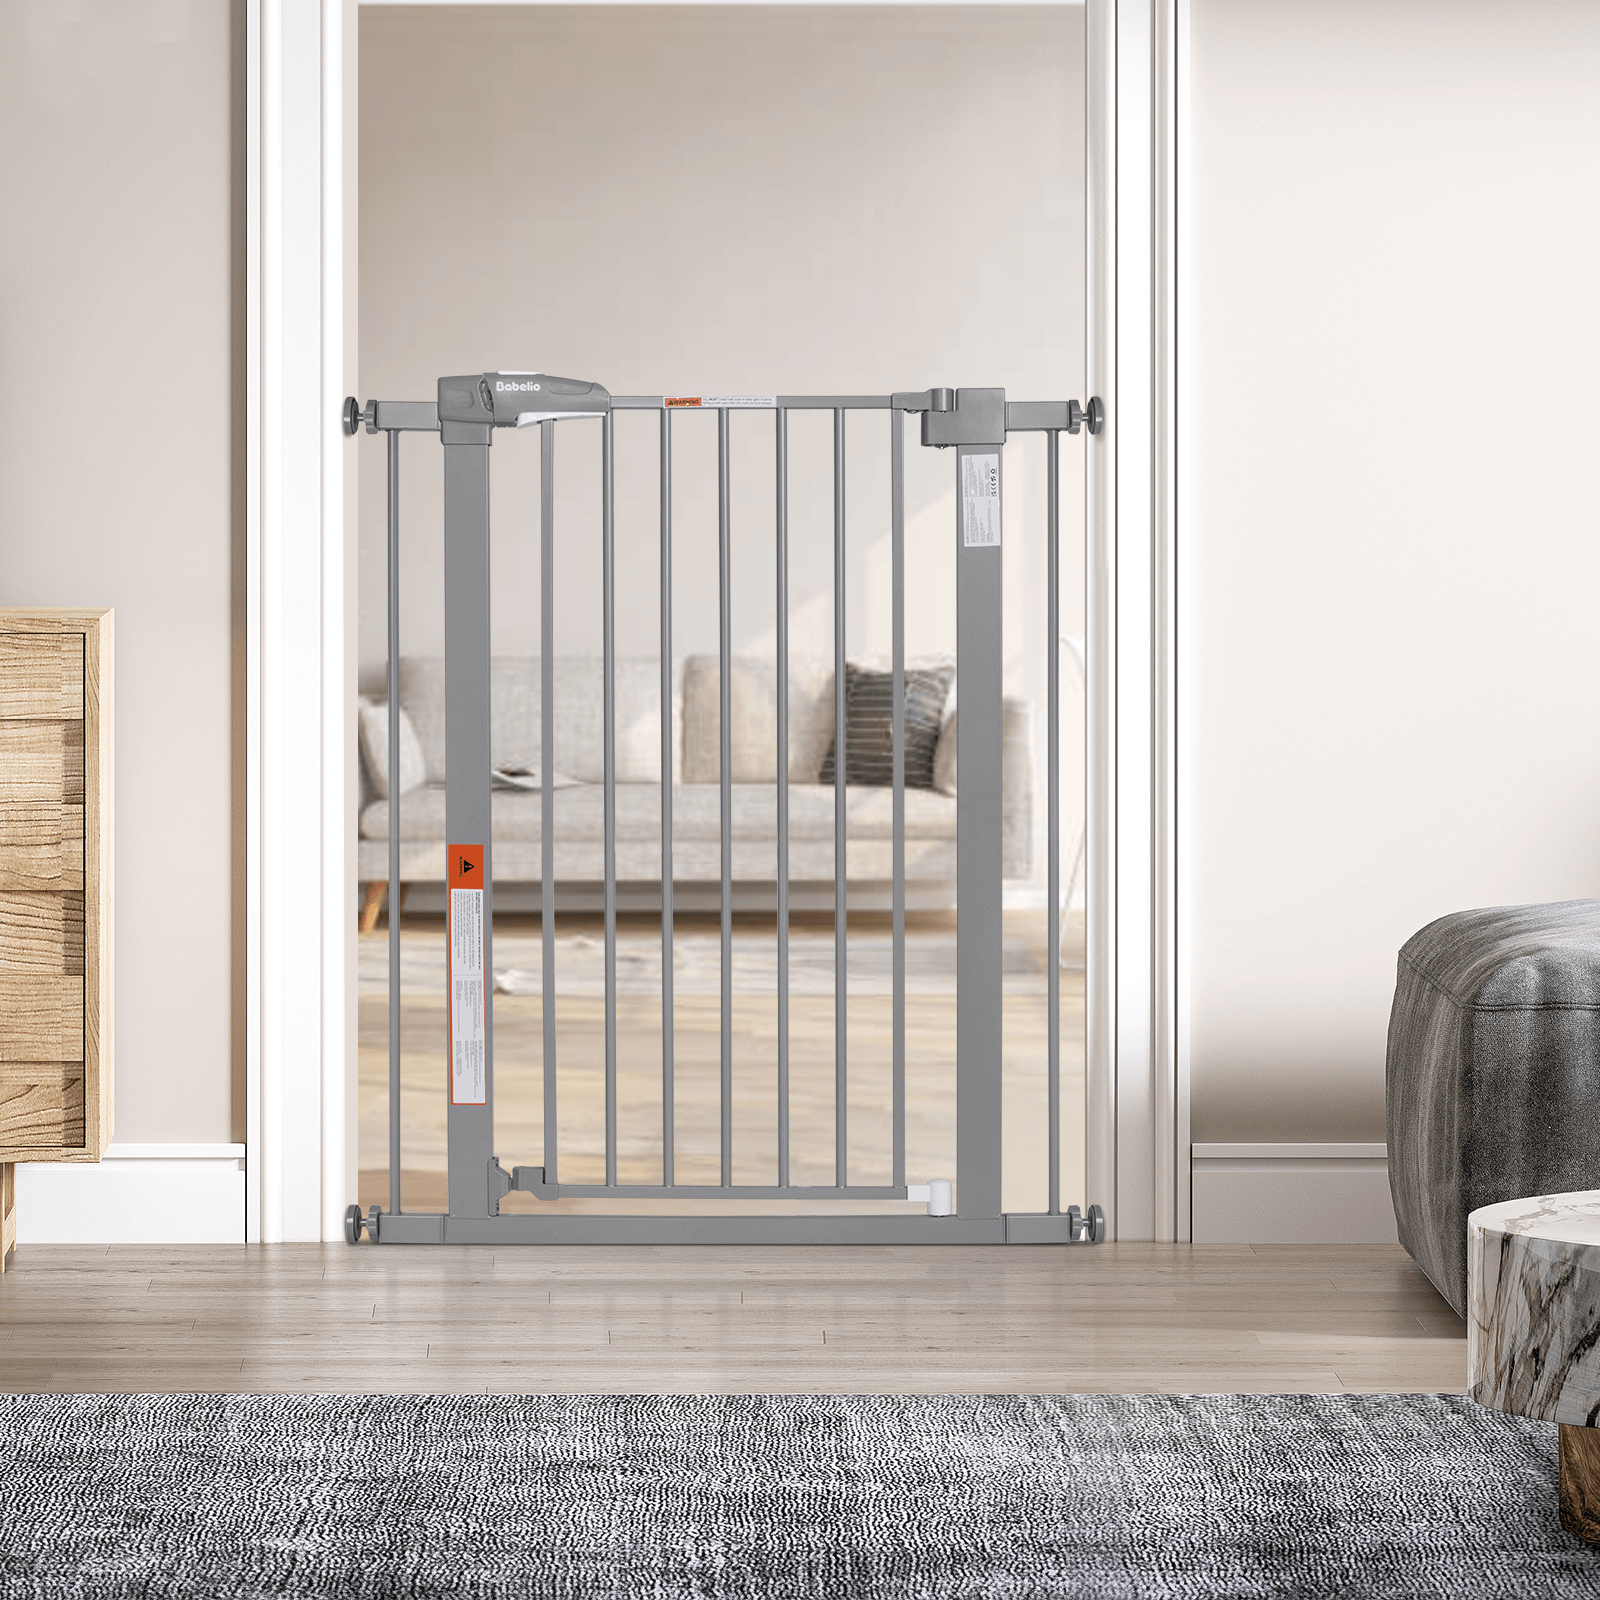 Babelio 36" High Adjustable Metal Baby/Pet Gate – 26-40" Wide, Auto-Close, Easy Install, Safe for Home Use